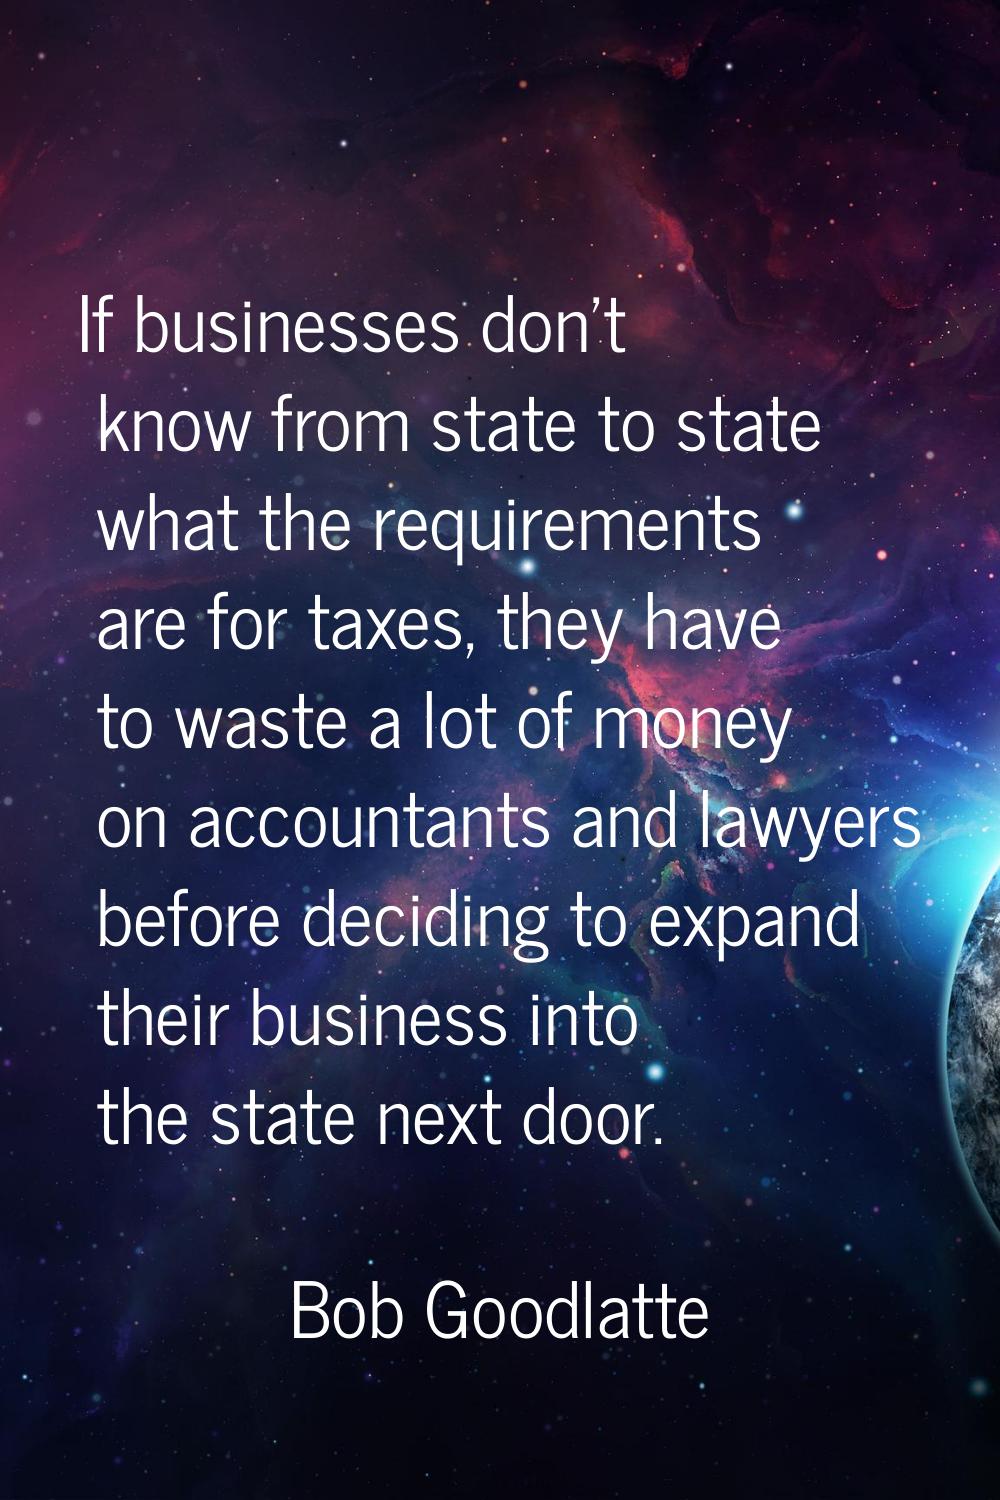 If businesses don't know from state to state what the requirements are for taxes, they have to wast